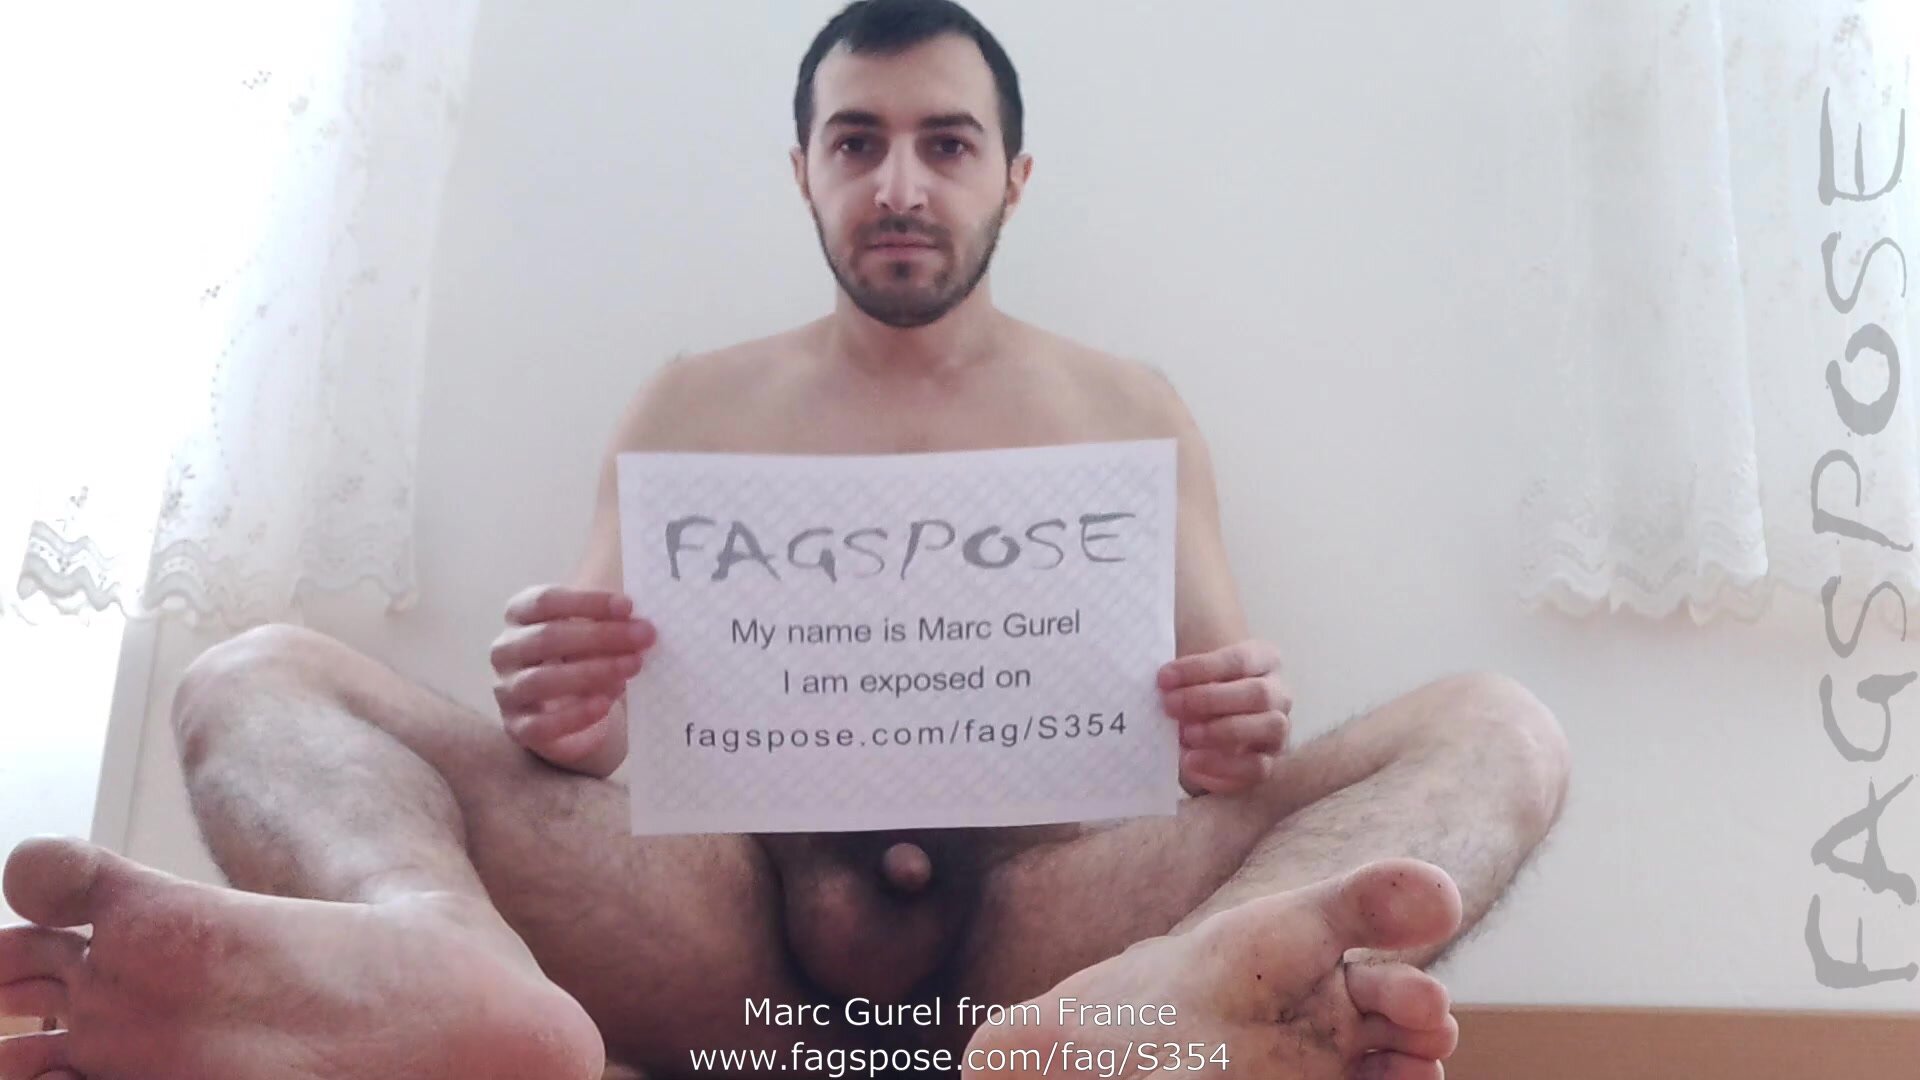 Marc Gurel from France exposed by Fagspose